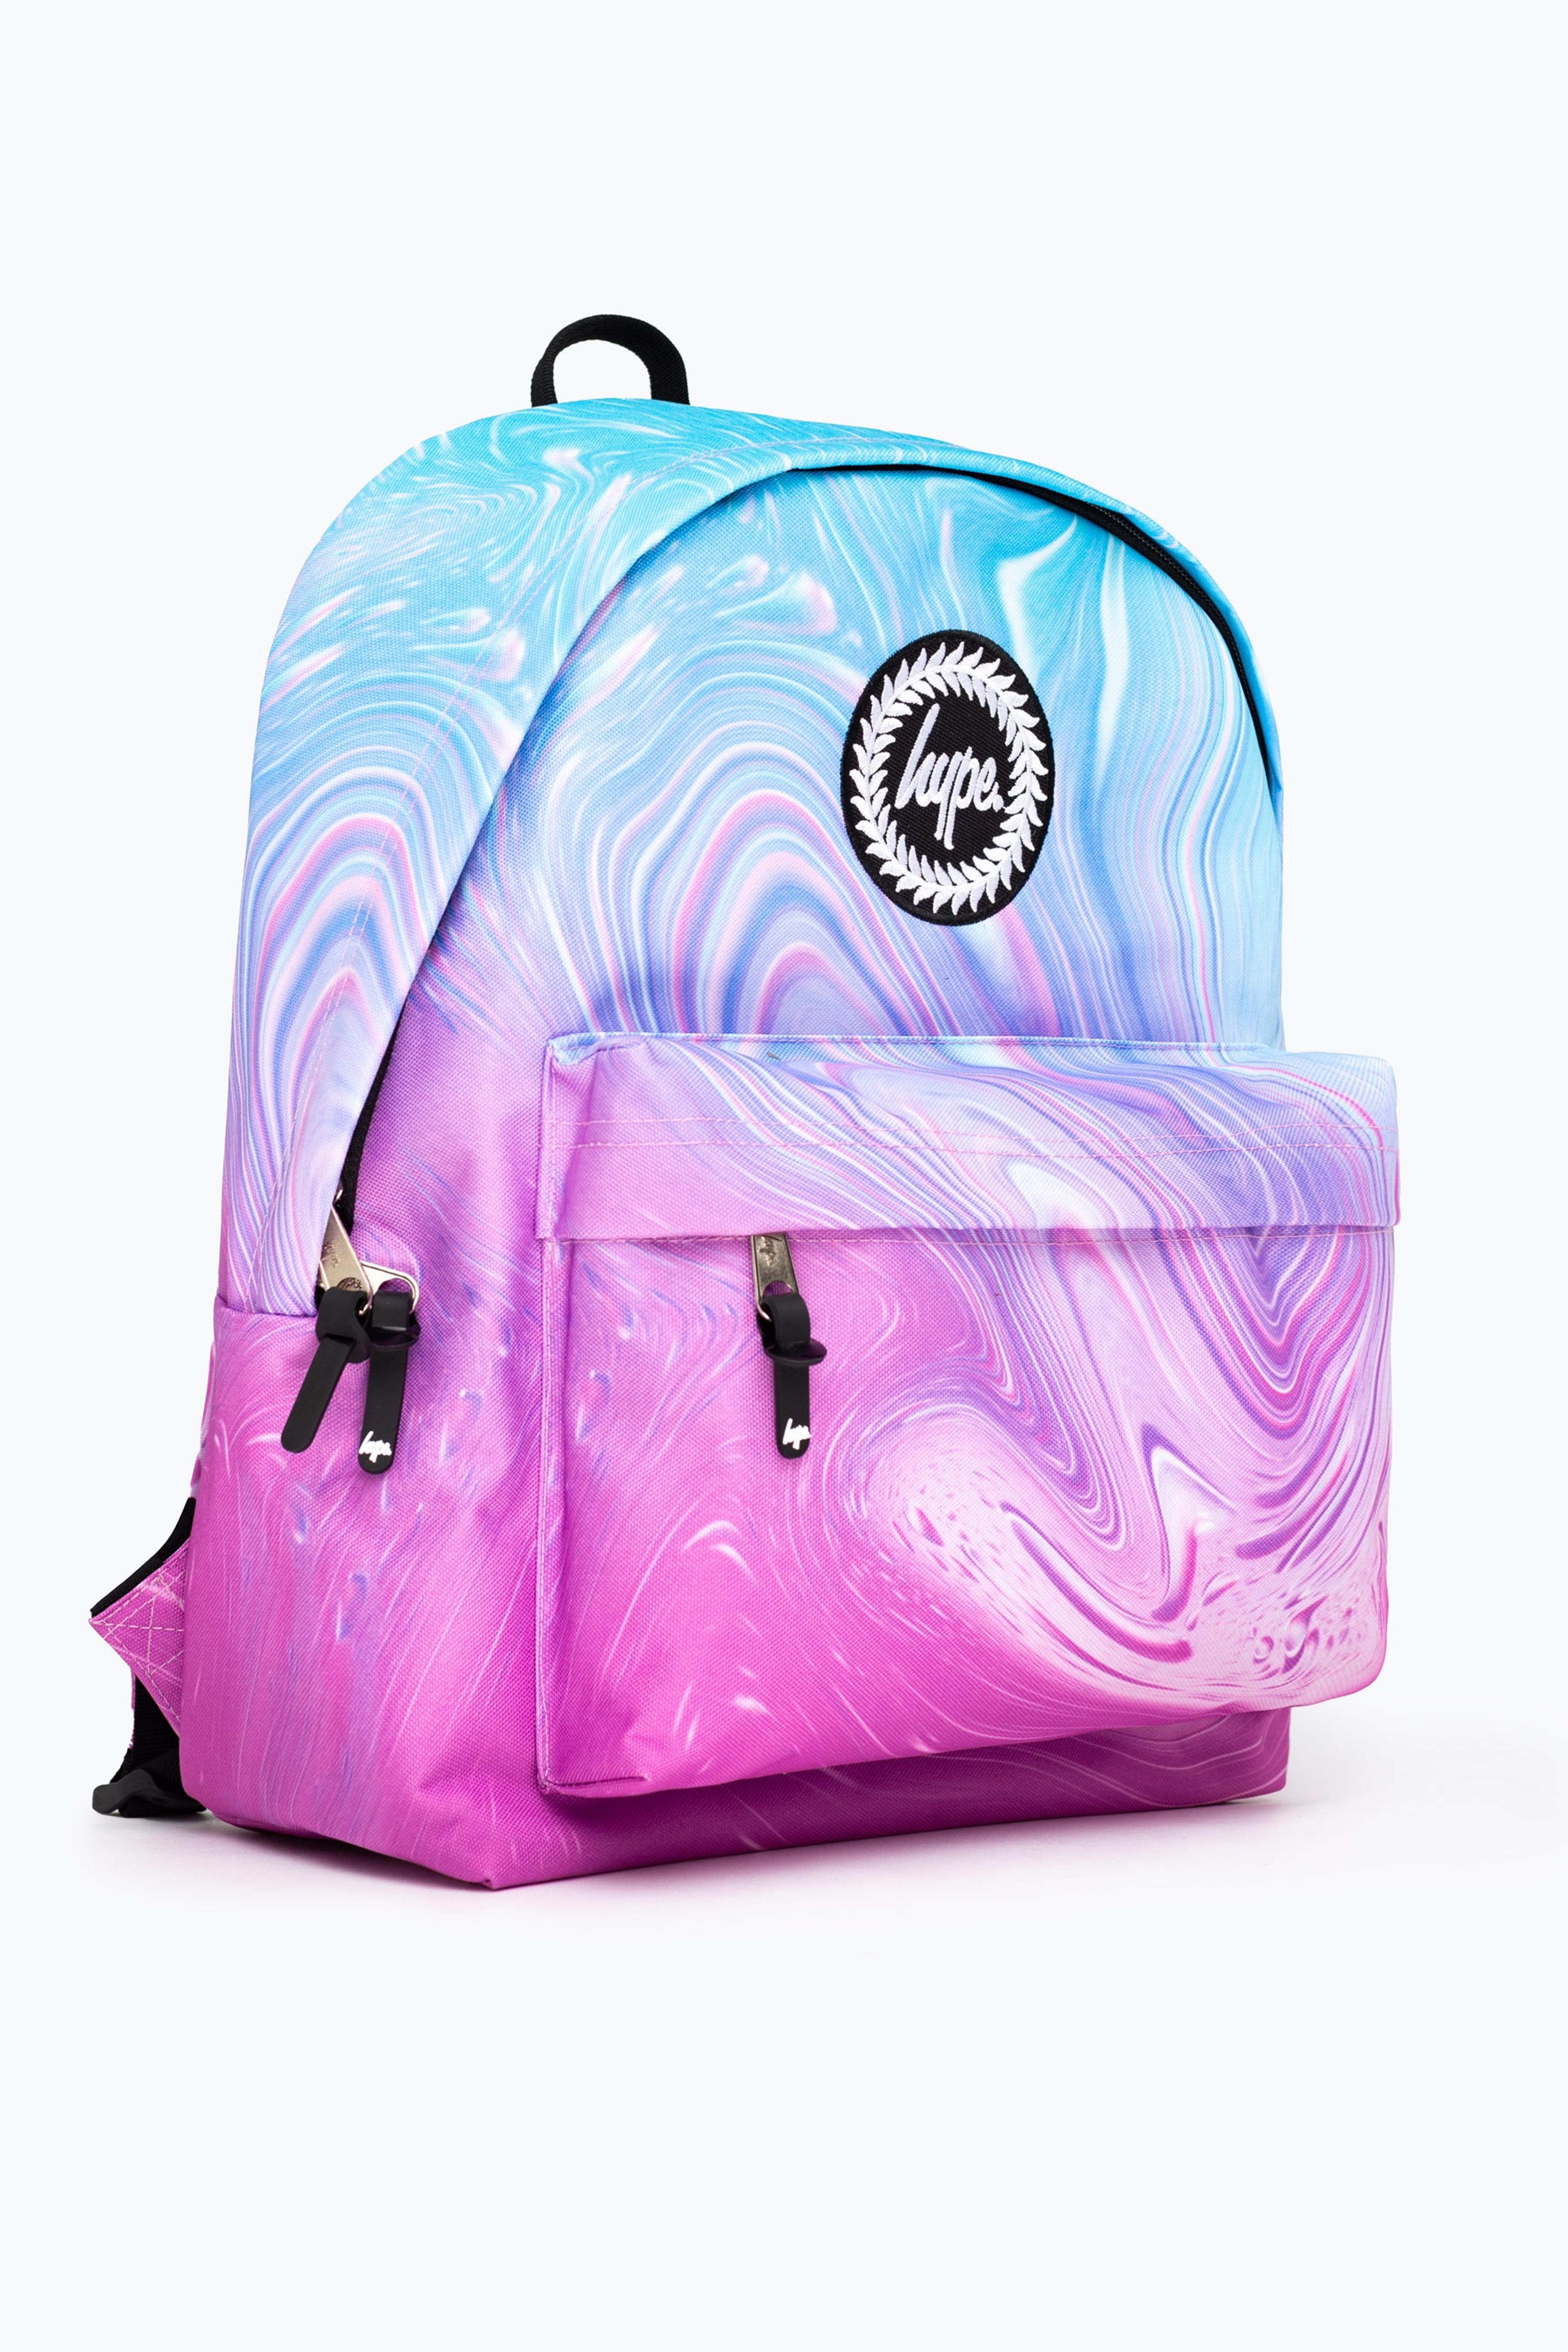 Alternate View 1 of HYPE UNISEX TEAL PURPLE MARBLE CREST BACKPACK